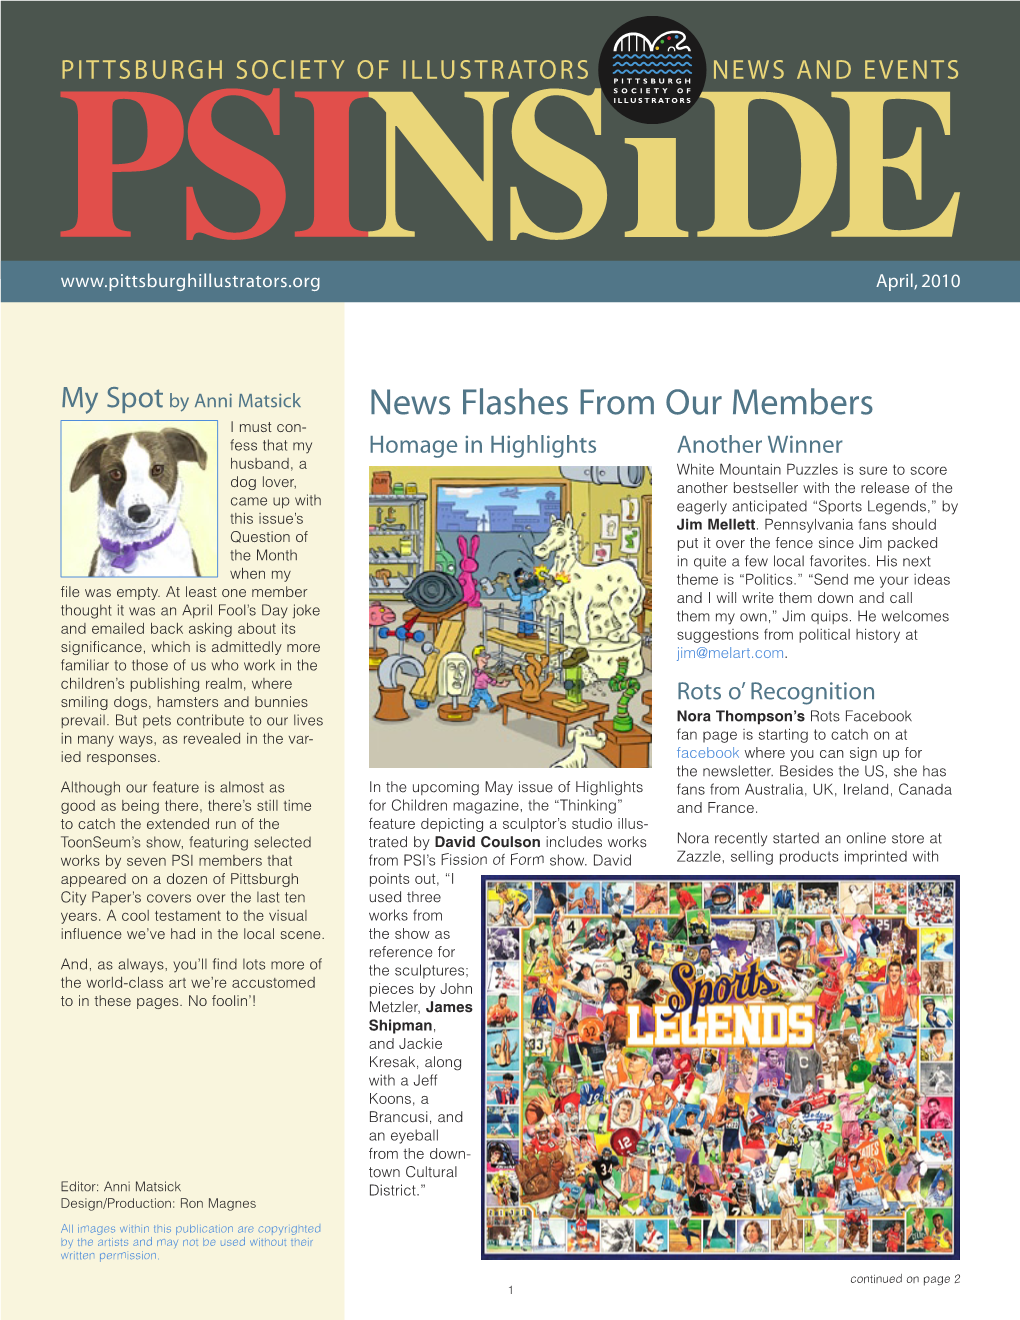 News Flashes from Our Members